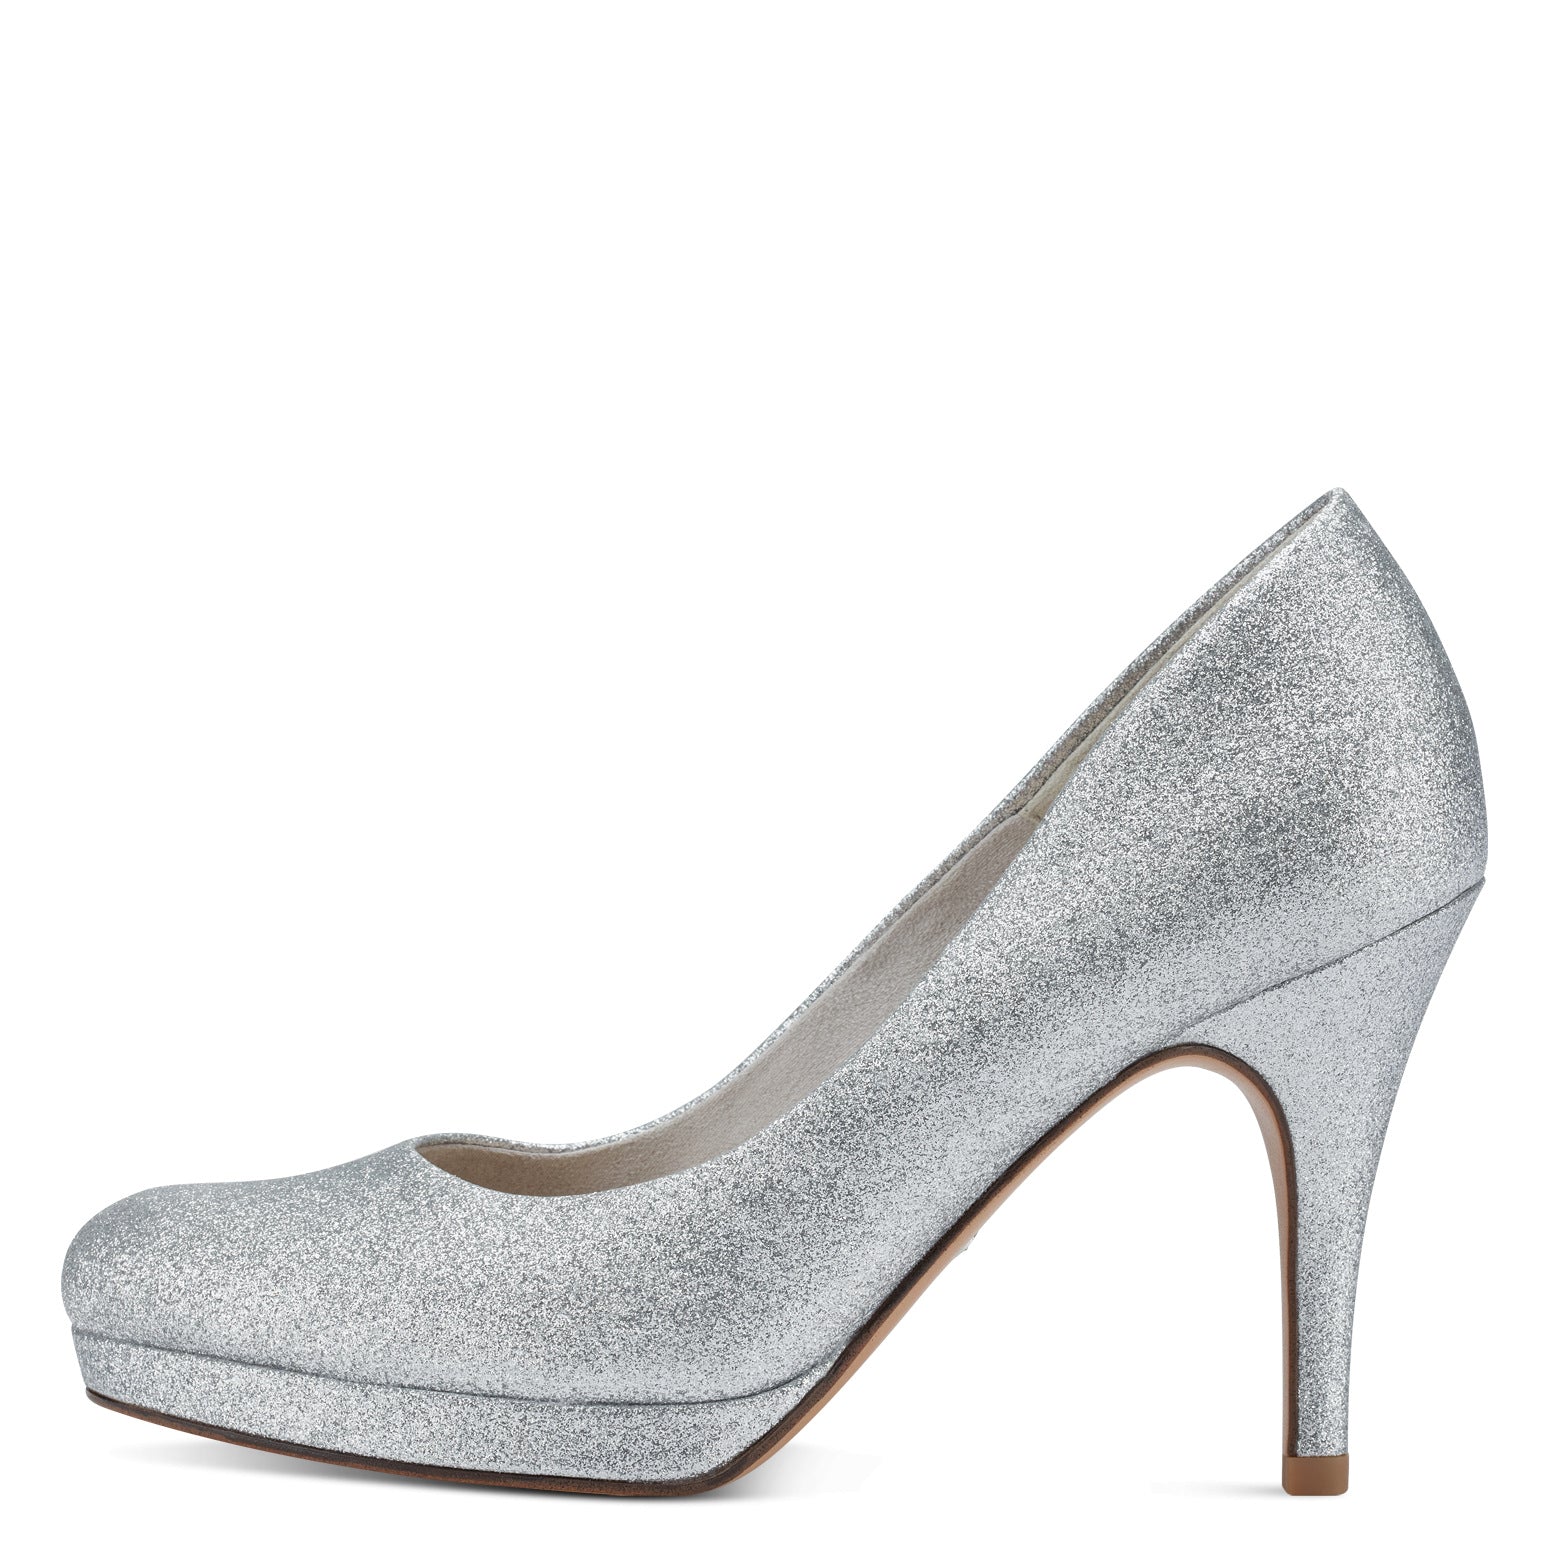 Front View of the Silver heels.